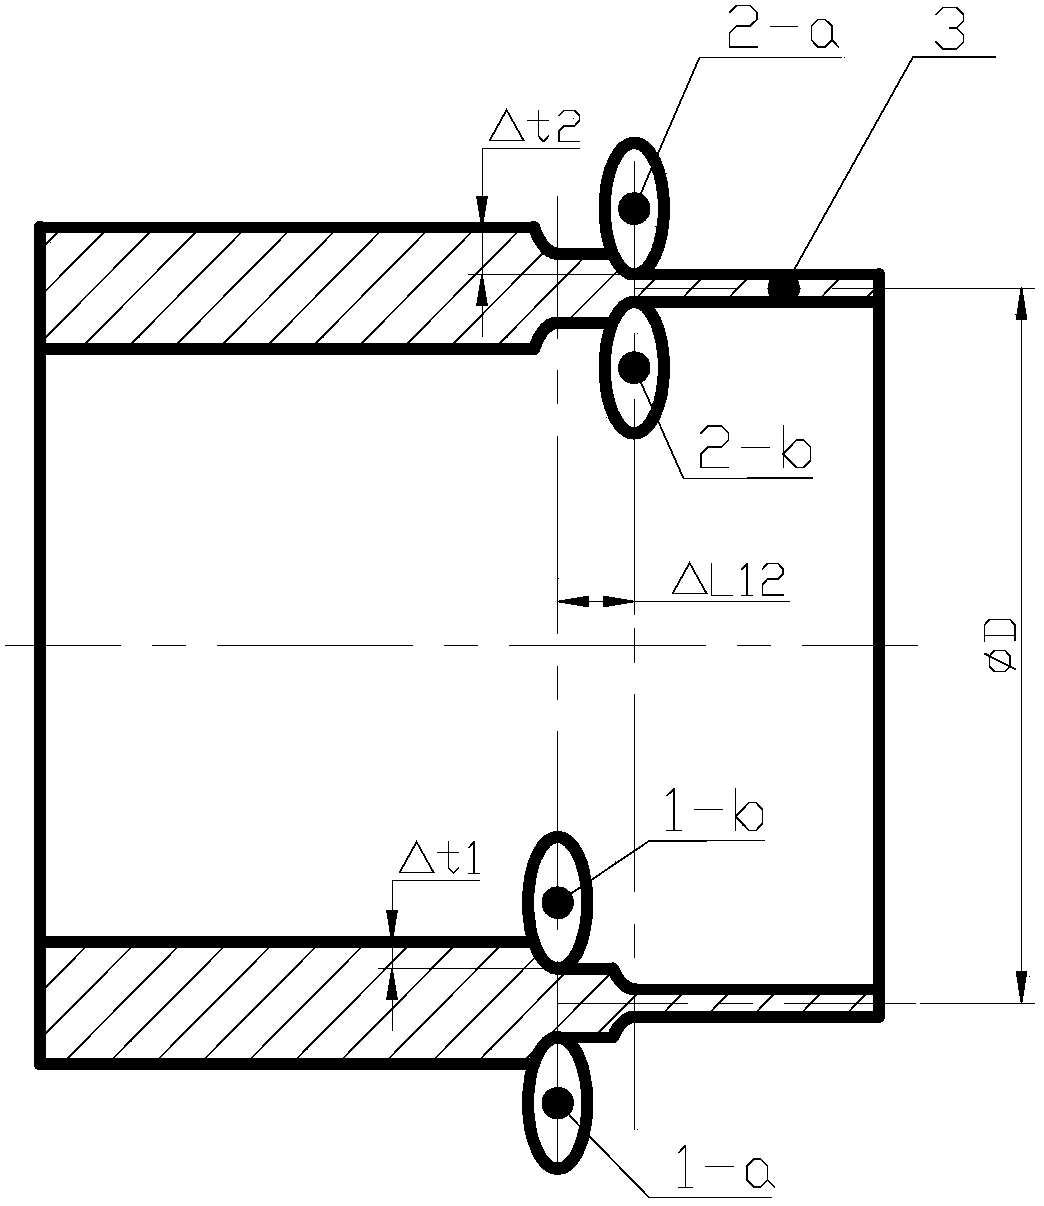 Method for achieving staggered reverse spinning of pairs of wheels